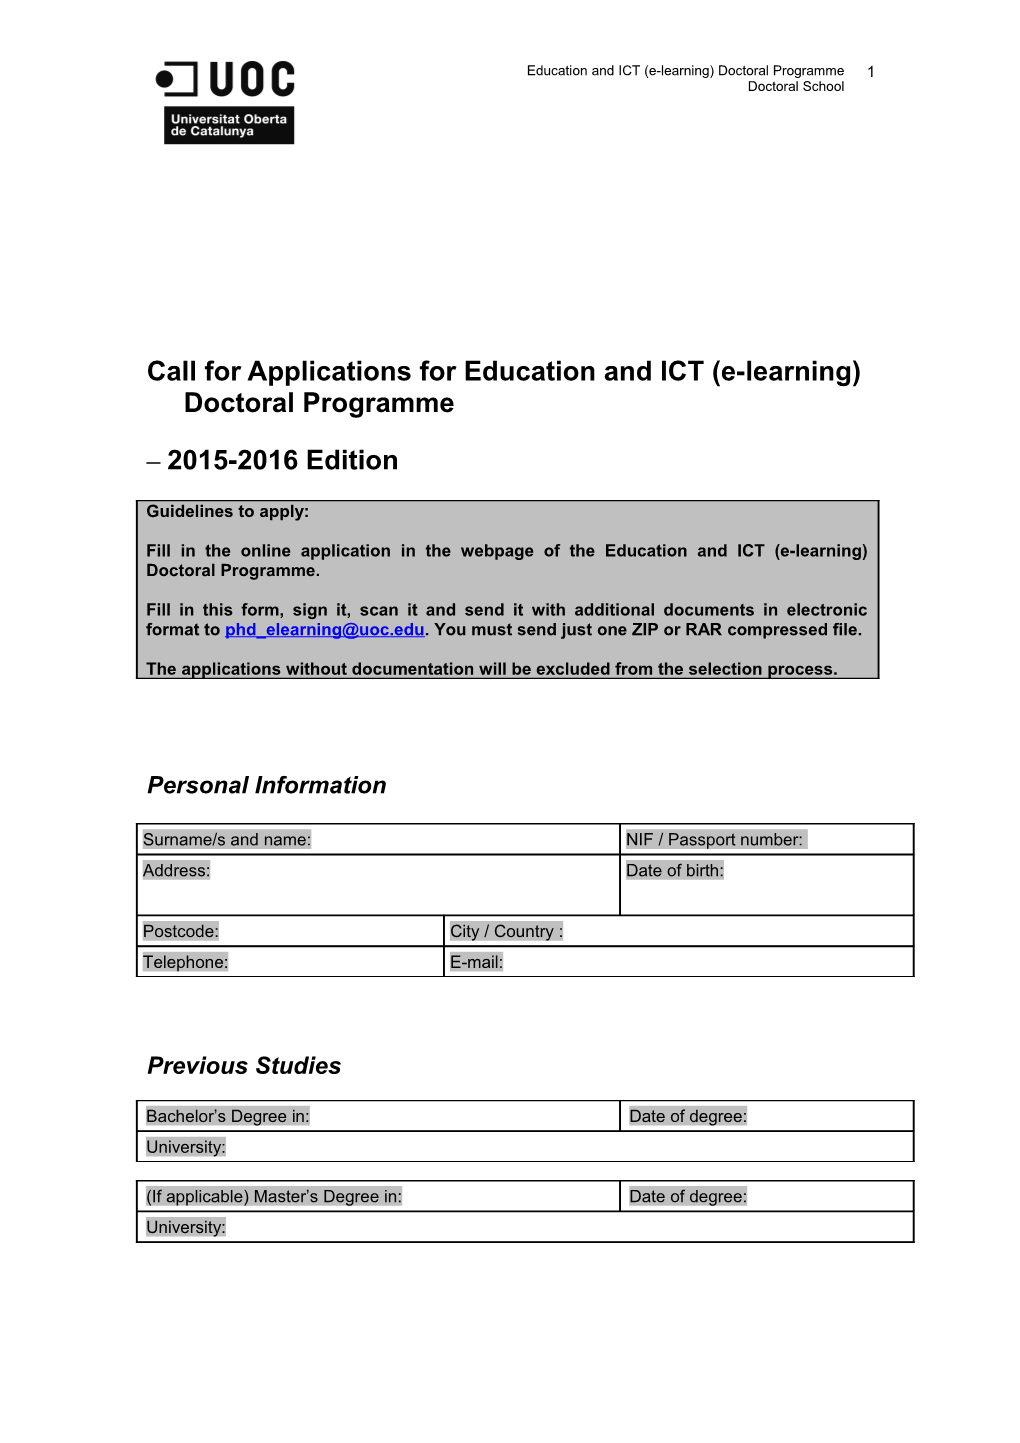 Call for Applications for Education and ICT (E-Learning) Doctoral Programme